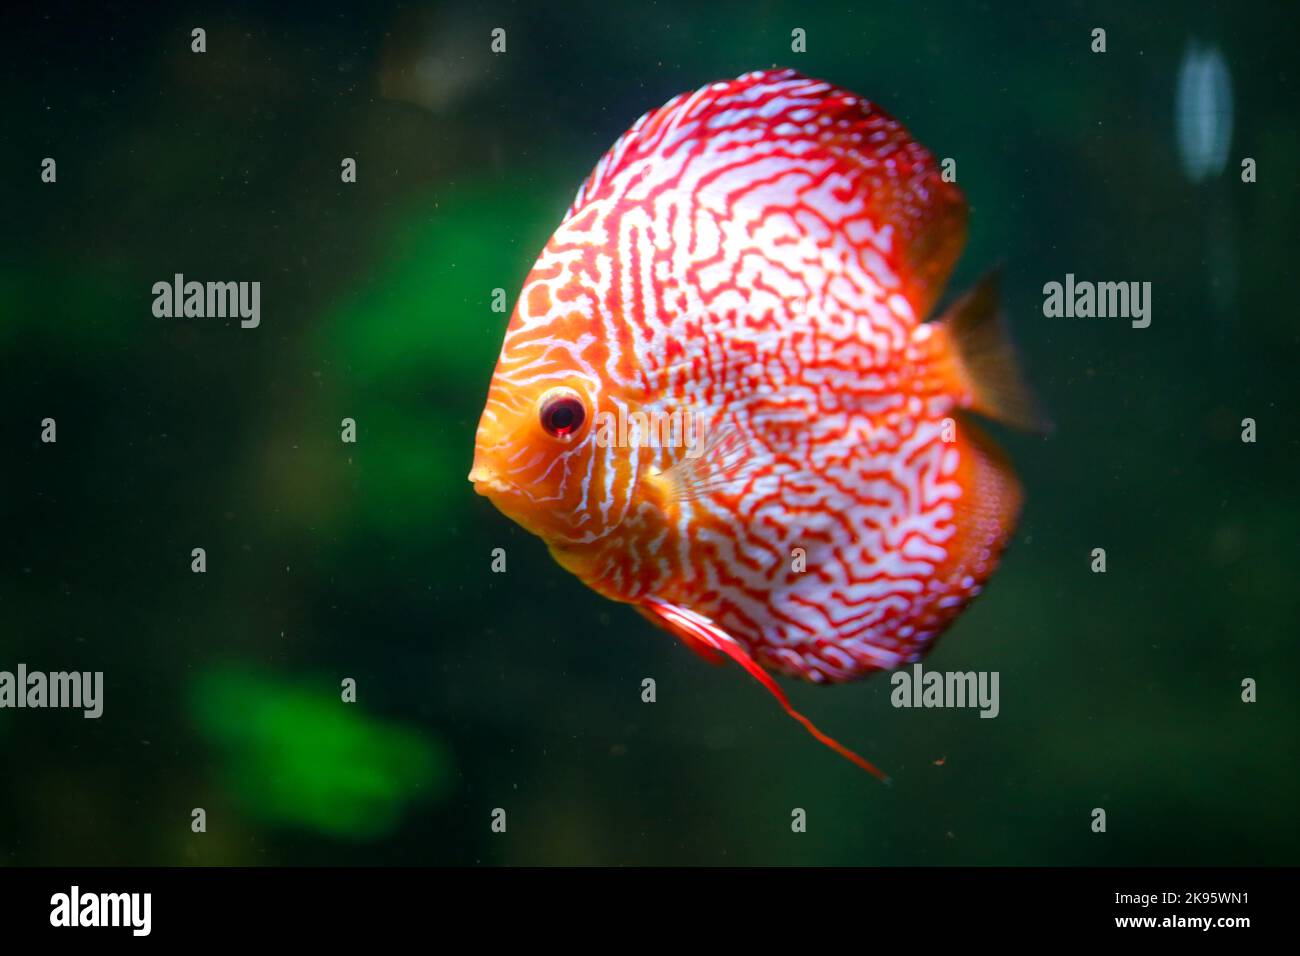 A closeup shot of a Red Discus fish under water with green background Stock Photo